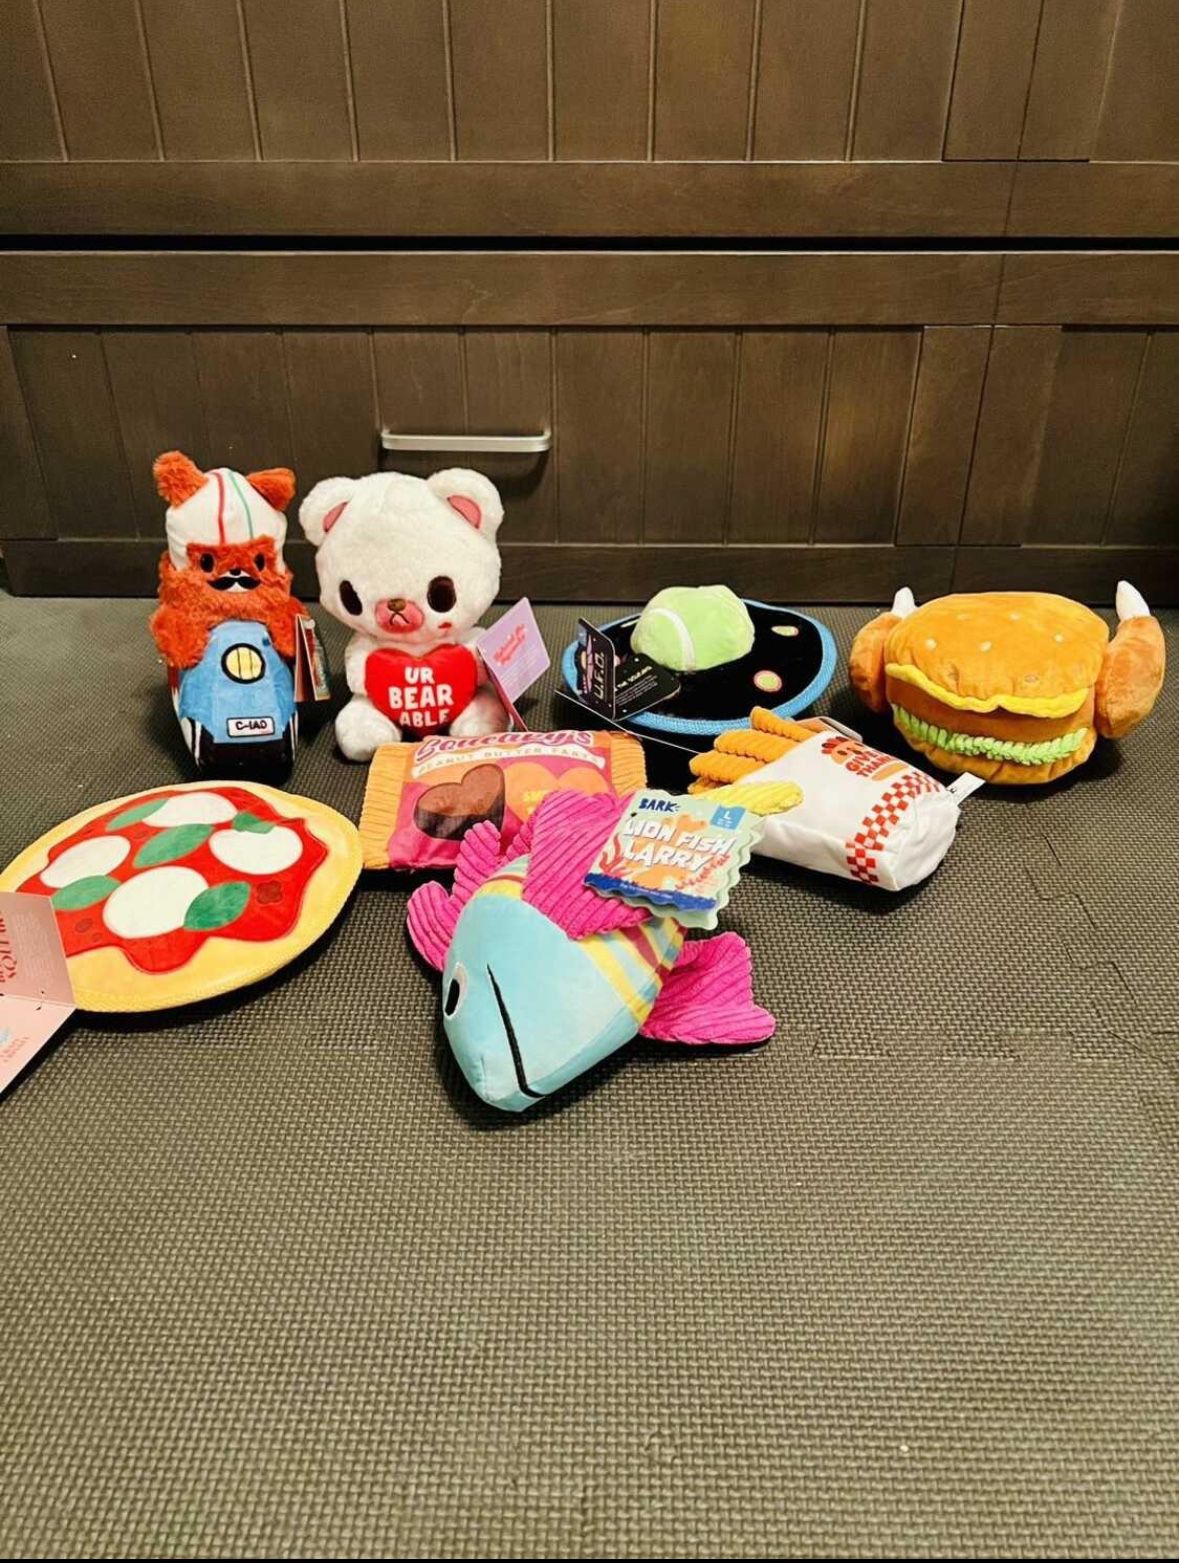 Lot of New Dog Toys